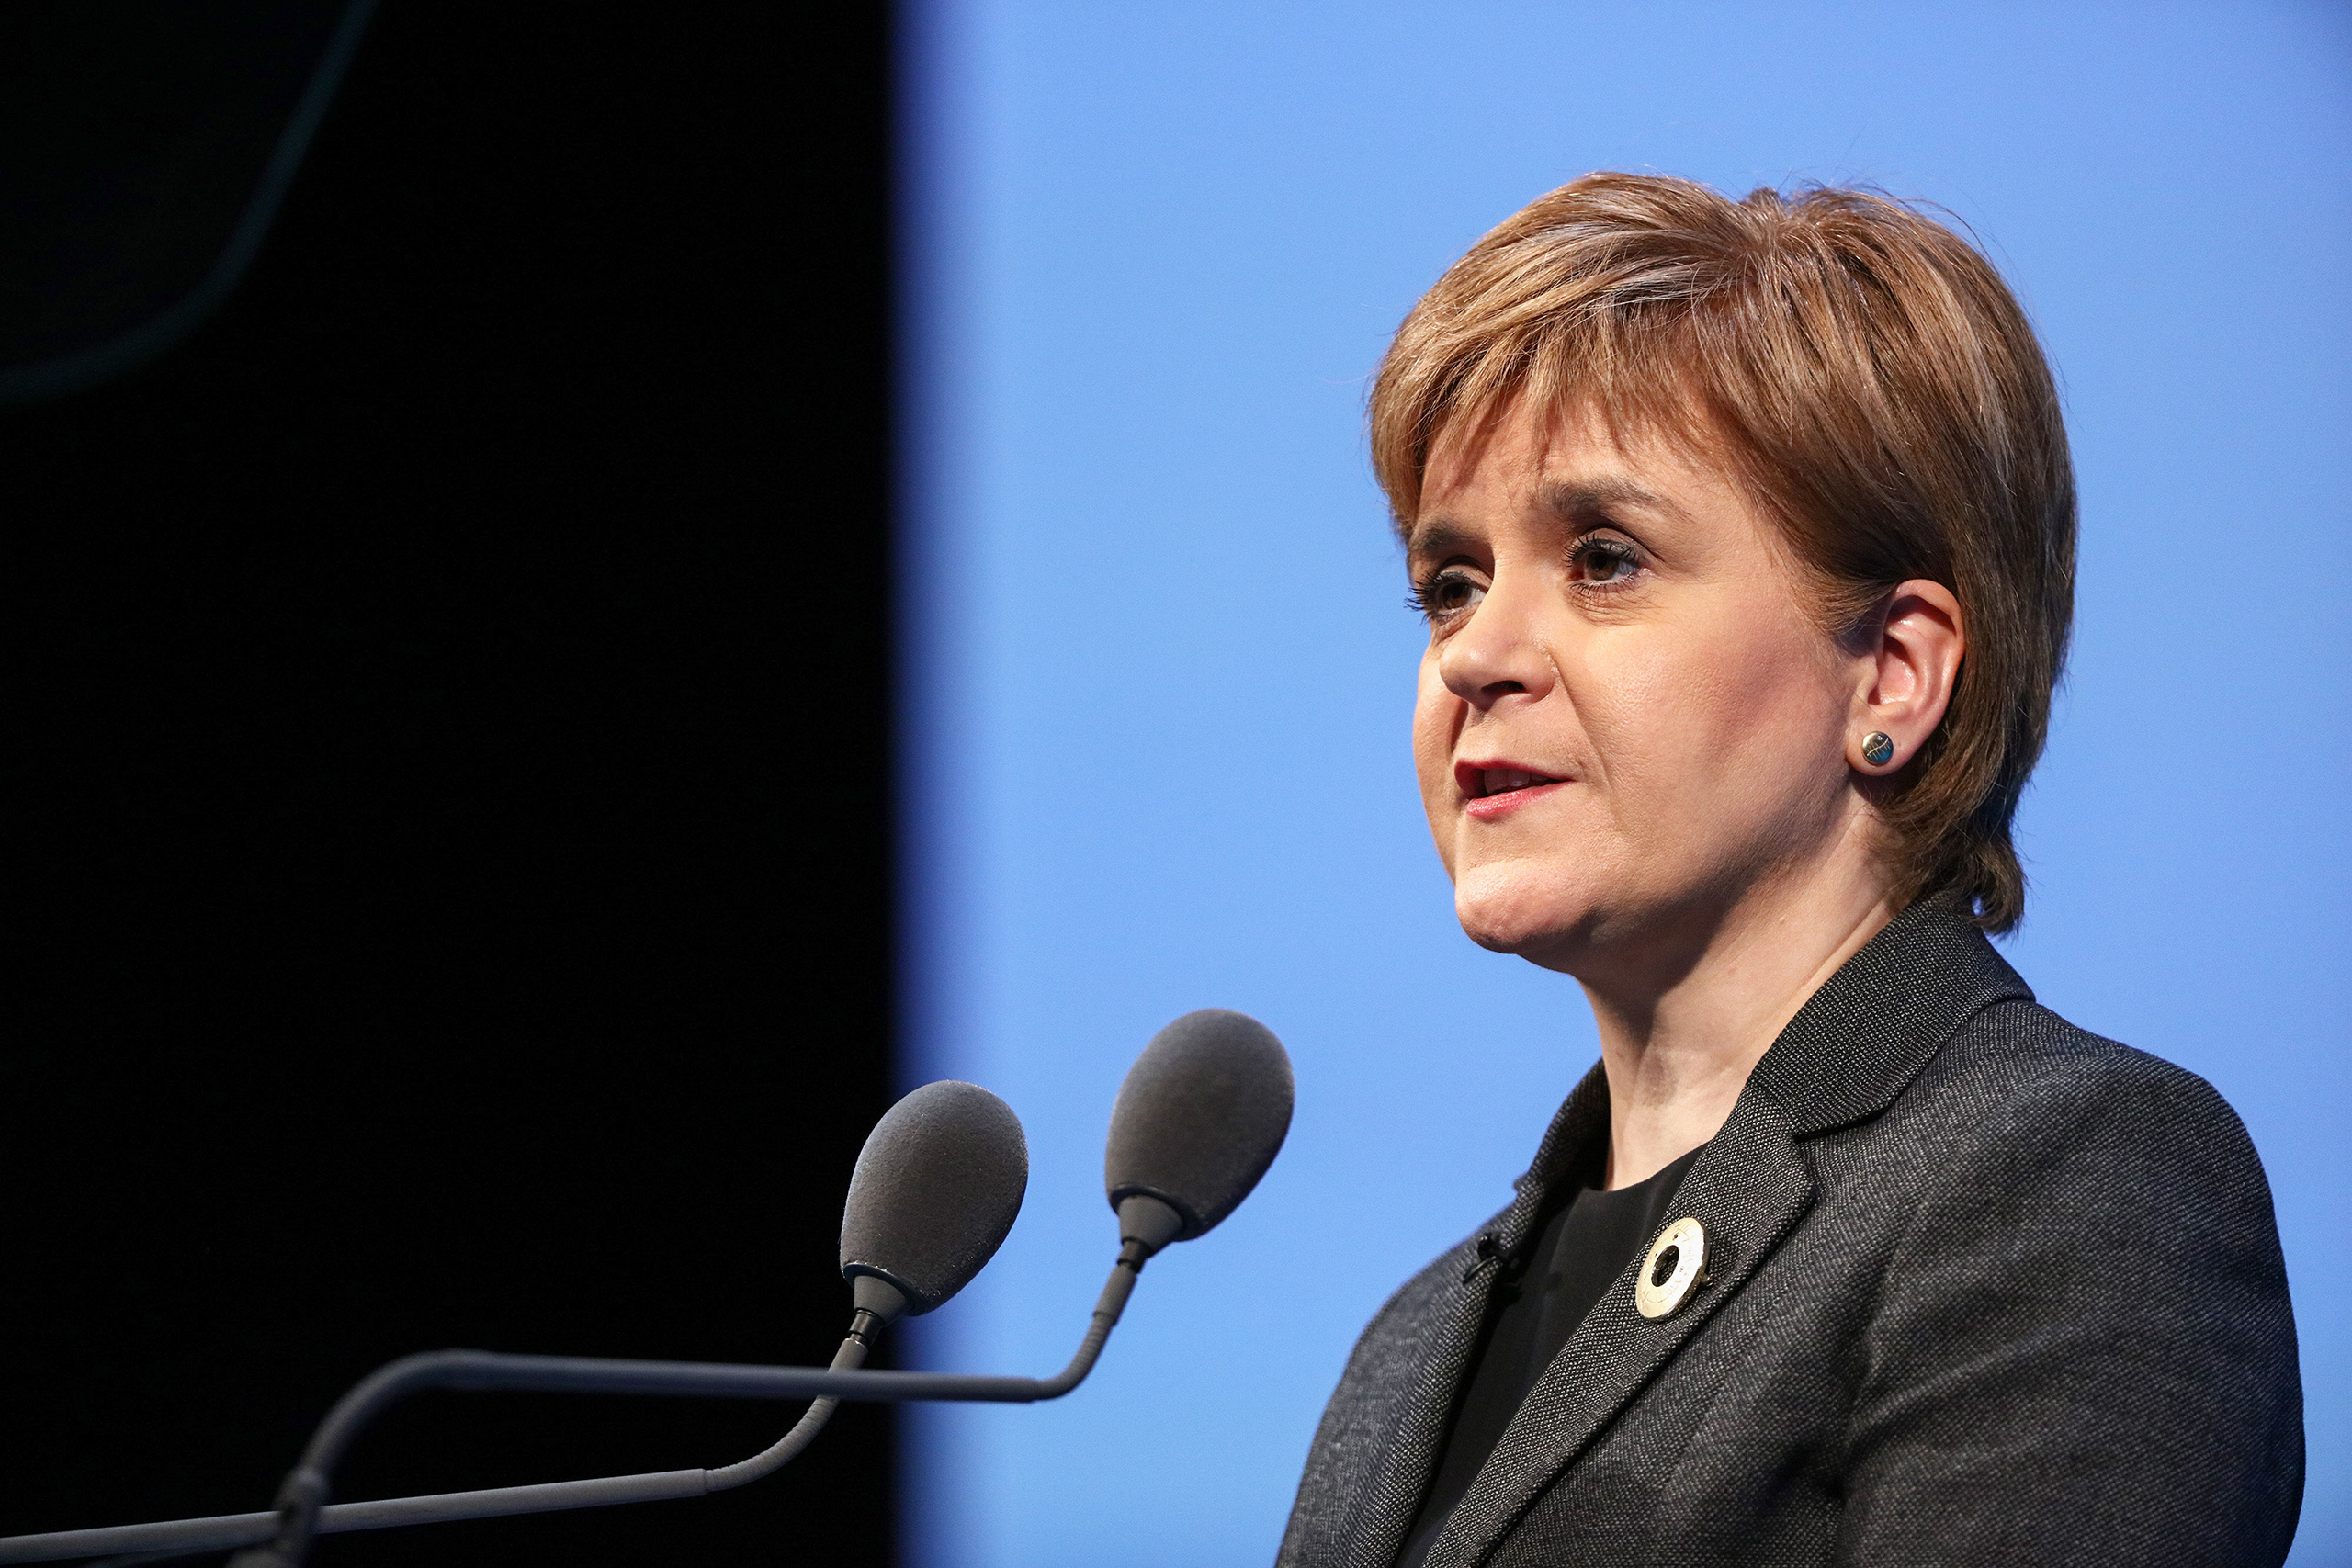 Nicola Sturgeon, Scotland's first minister and leader of the Scottish National Party (SNP), speaks during the Institute of Directors (IoD) Annual Convention 2016 at the Royal Albert Hall in London, U.K., on Sept. 27, 2016 (Chris Ratcliffe—Bloomberg/Getty Images)